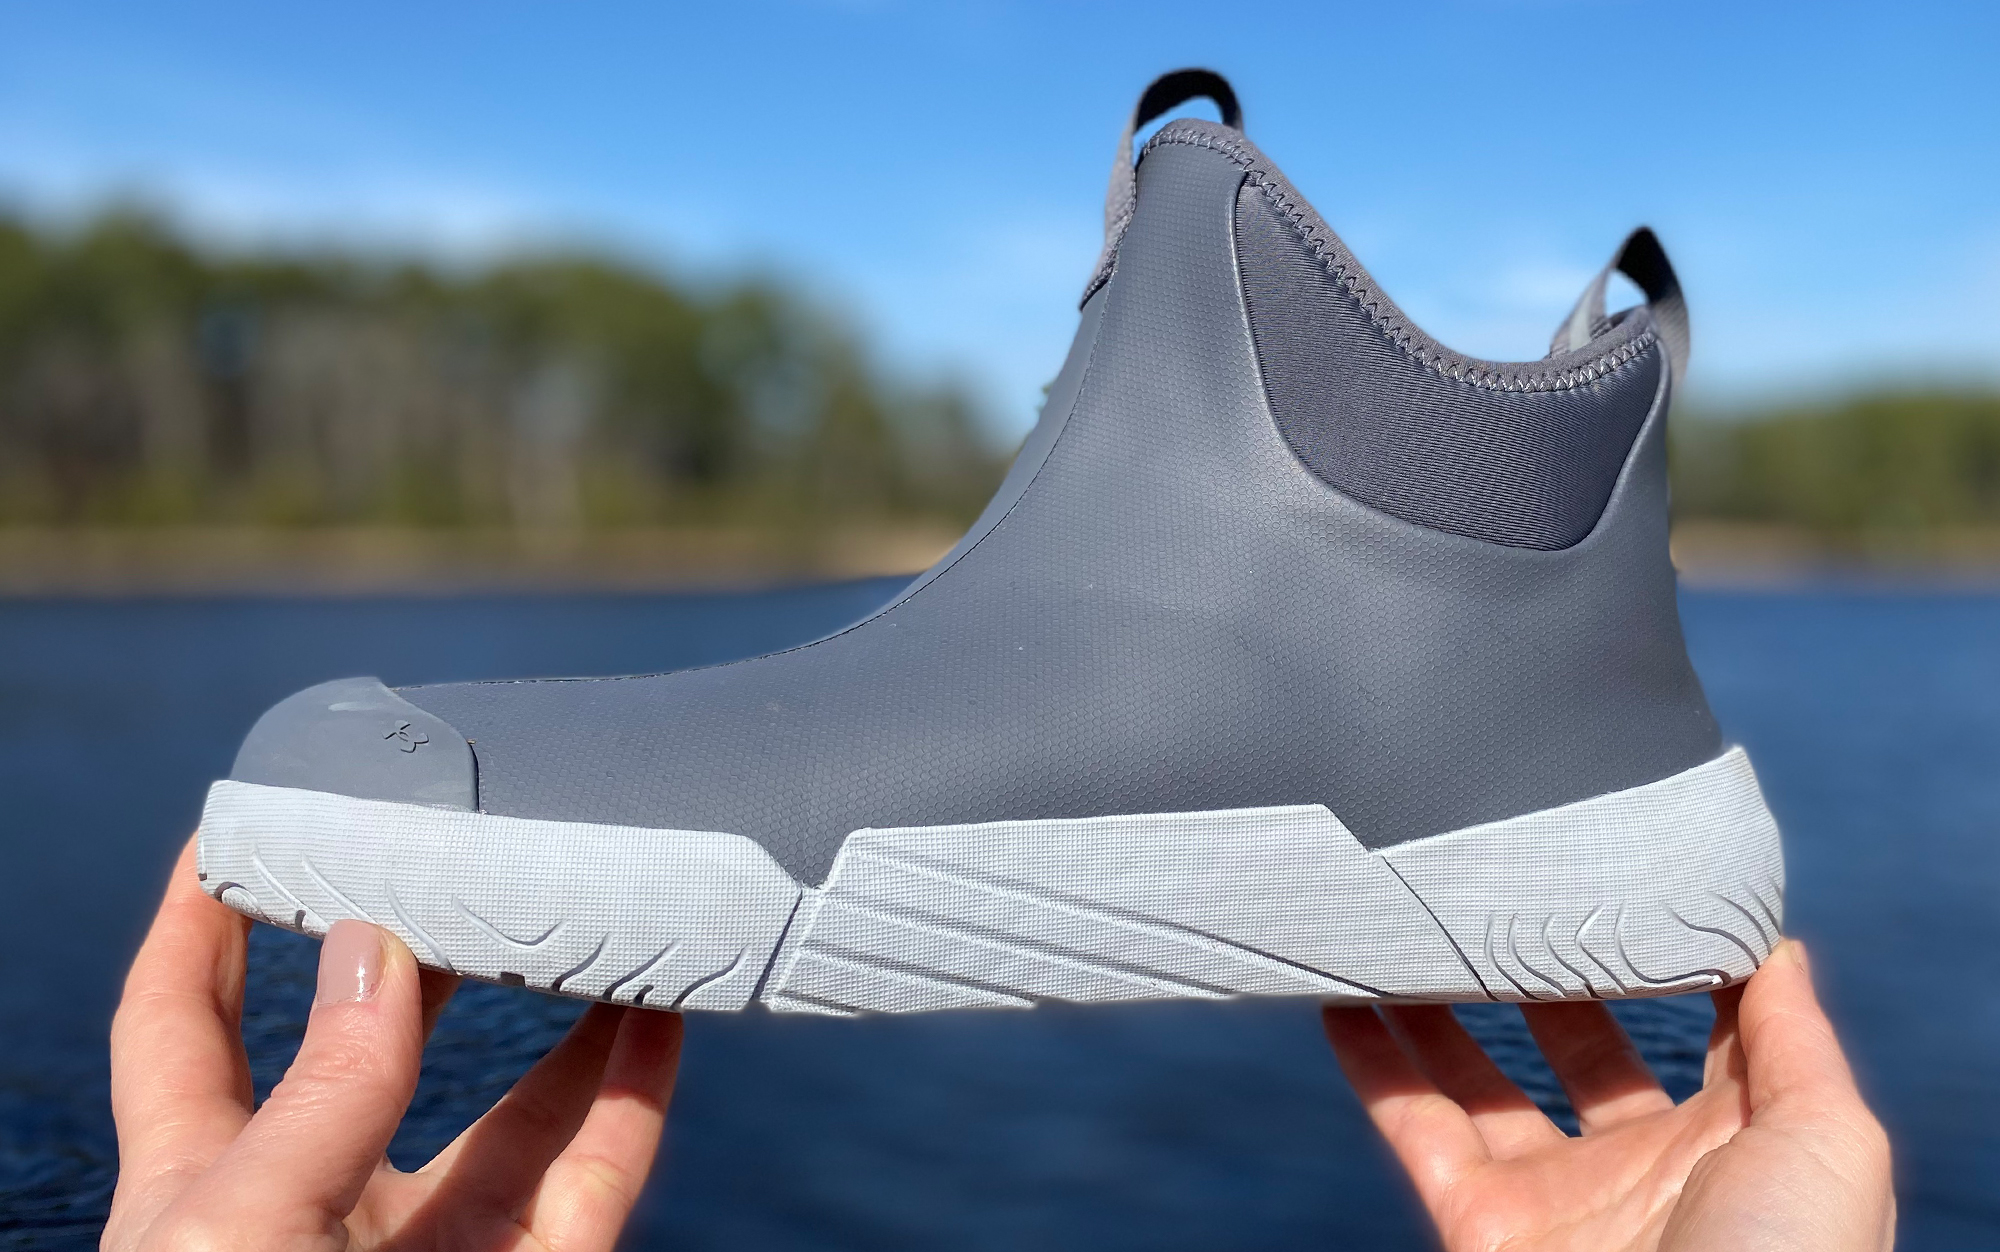 We tested the Under Armour Shoreman Deck Boot.